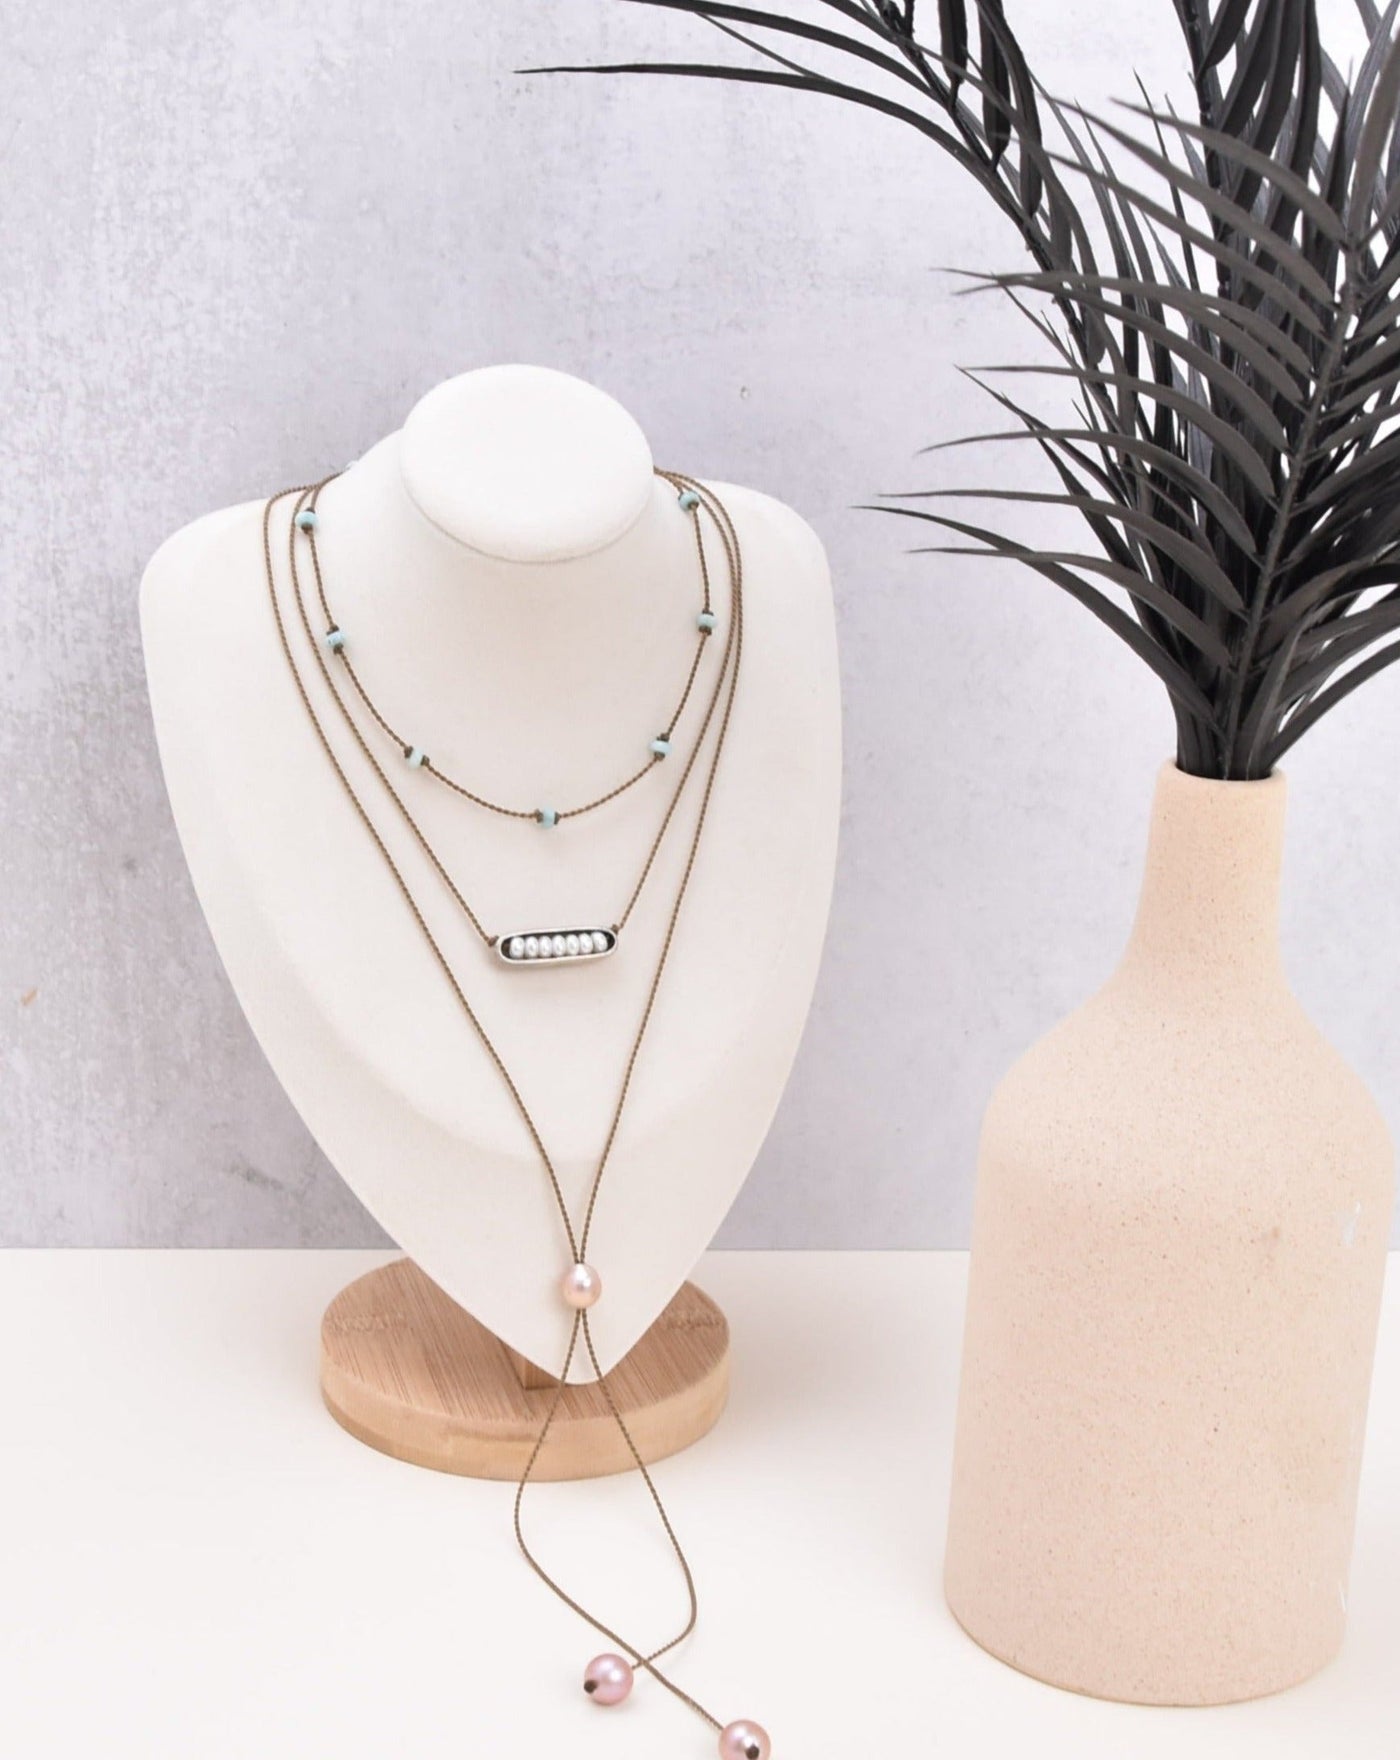 Winter Sunrise - Necklace Stack (15% off)